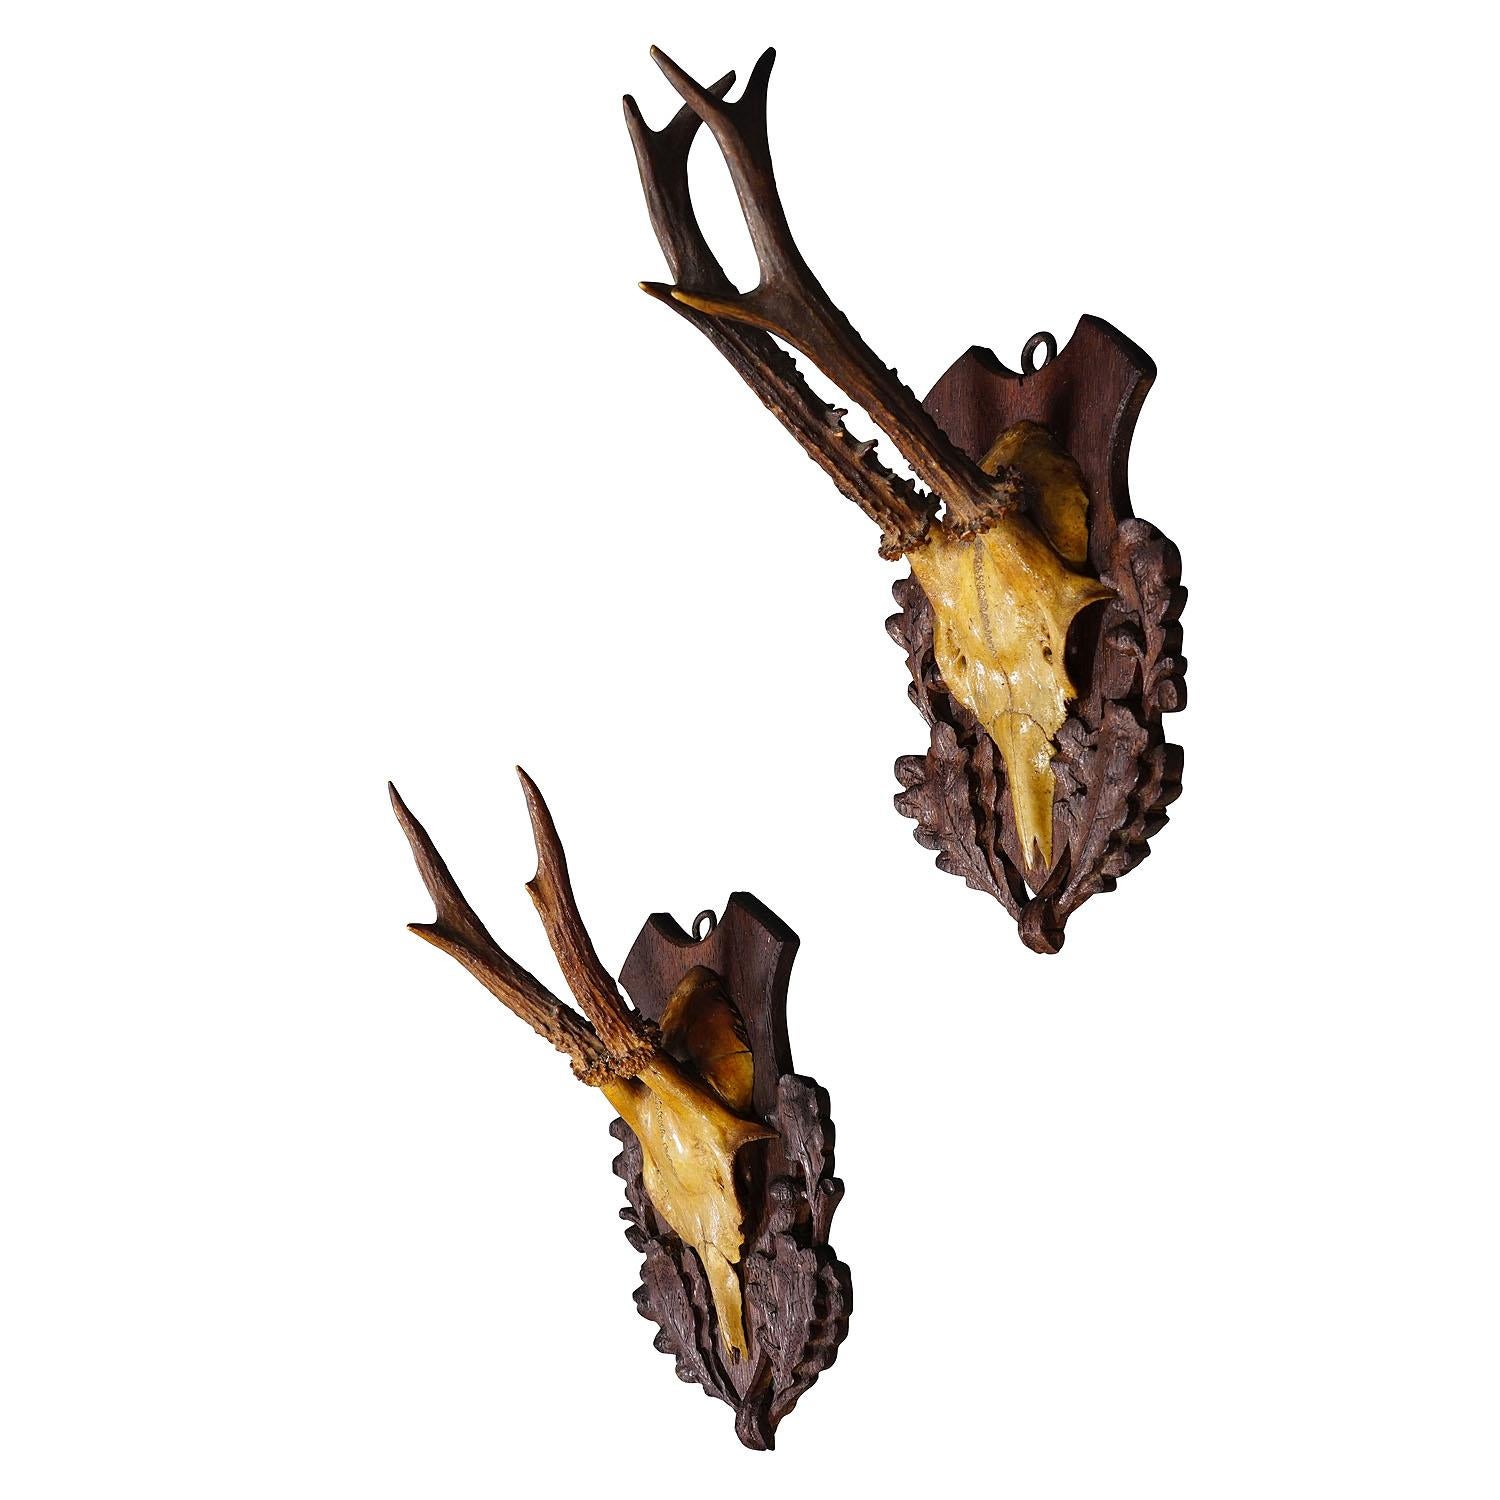 A Pair Antique Black Forest Deer Trophies on Wooden Plaques 1900s

A pair antique Black Forest roe deer (Capreolus capreolus) trophies mounted on carved oak plaques. The trophies where hunted in Germany around 1900. A great addition to every rustic